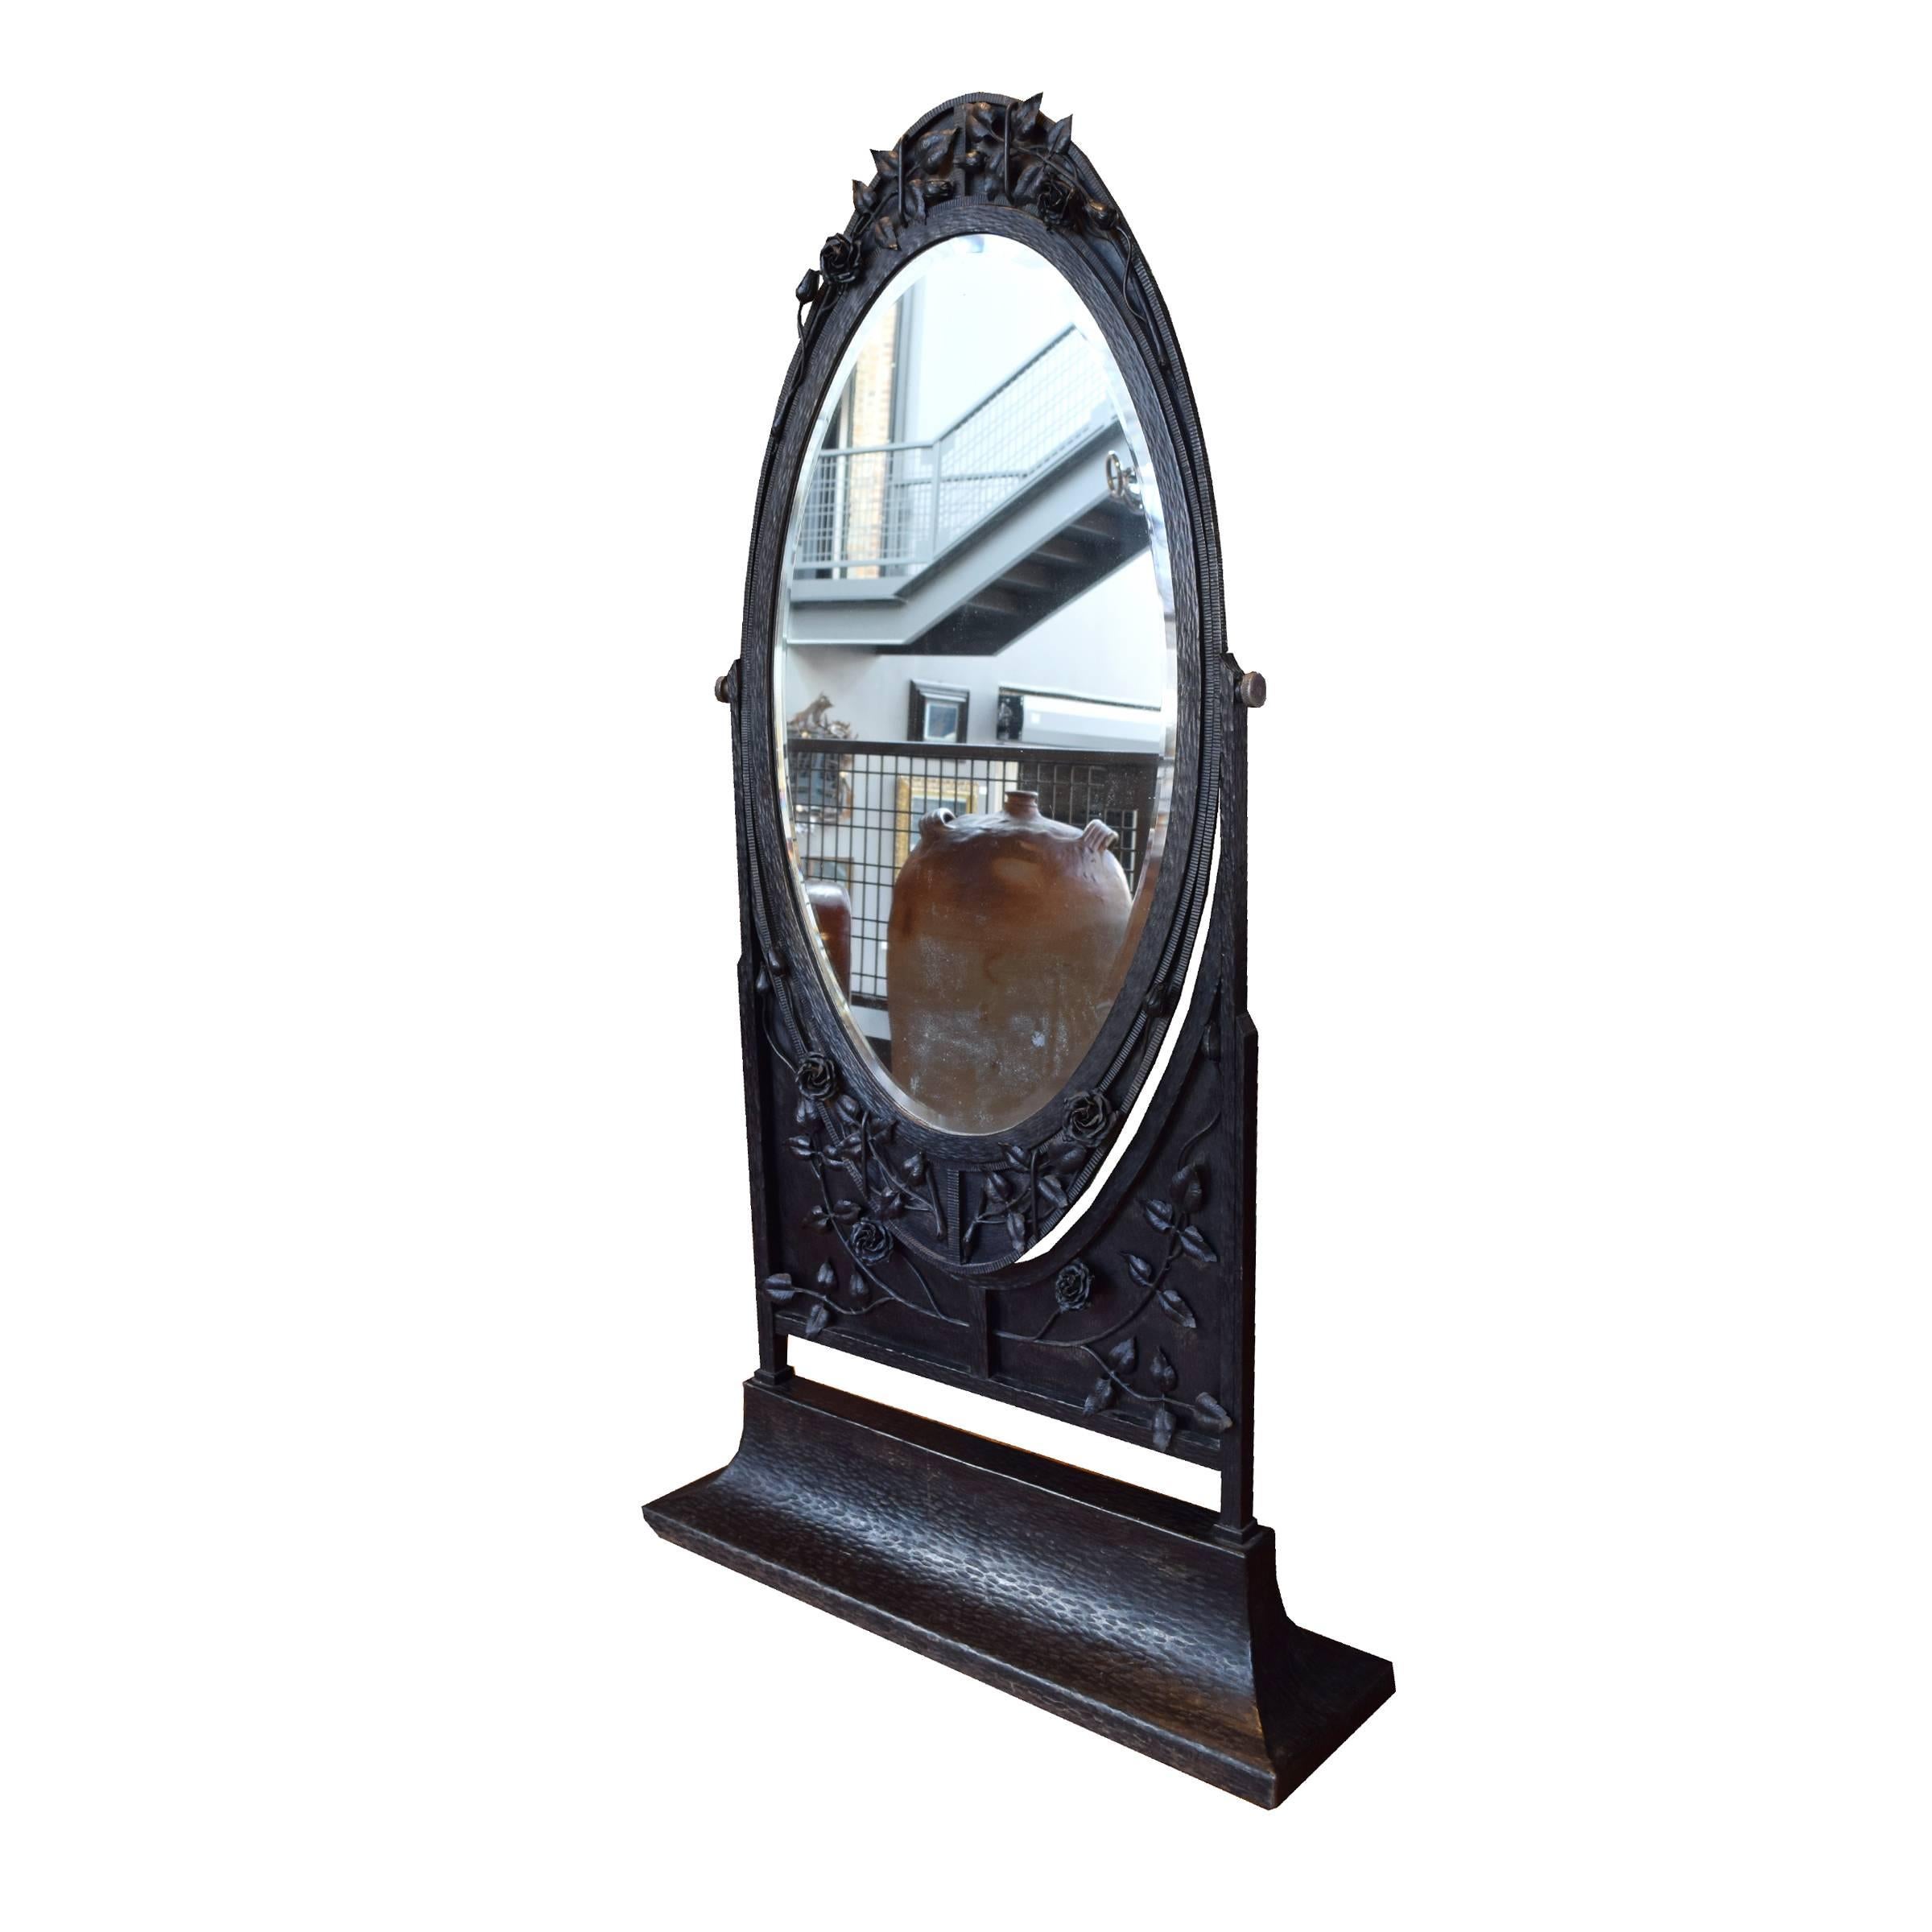 A gorgeous French fer forge pivoting dressing mirror on wheels with beveled oval glass and a lovely hand-wrought rose and vines decorated frame, circa 1920s.
